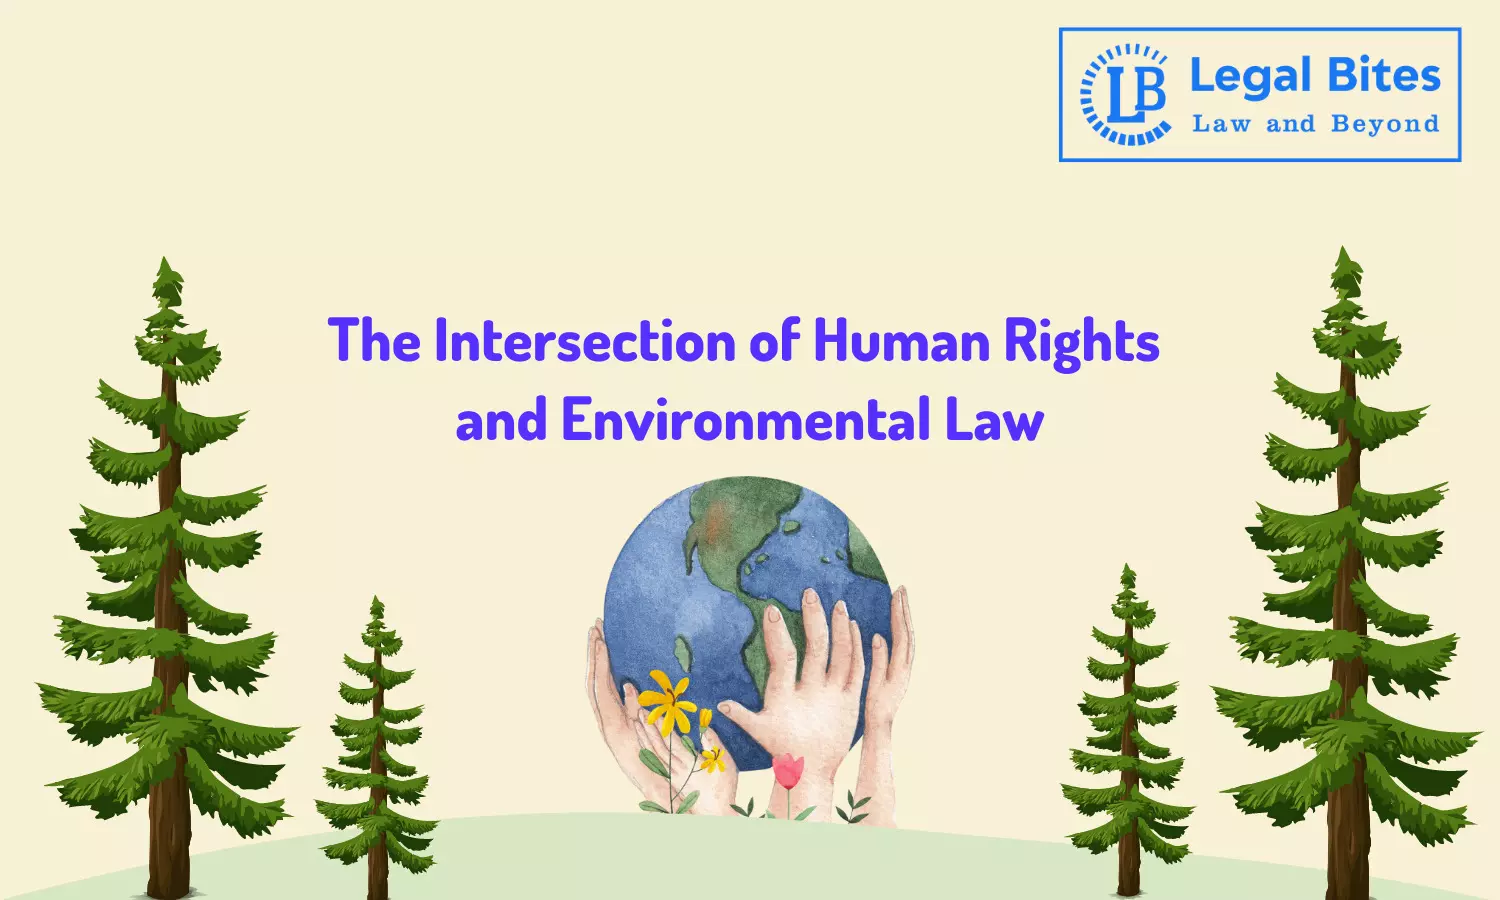 The Intersection of Human Rights and Environmental Law